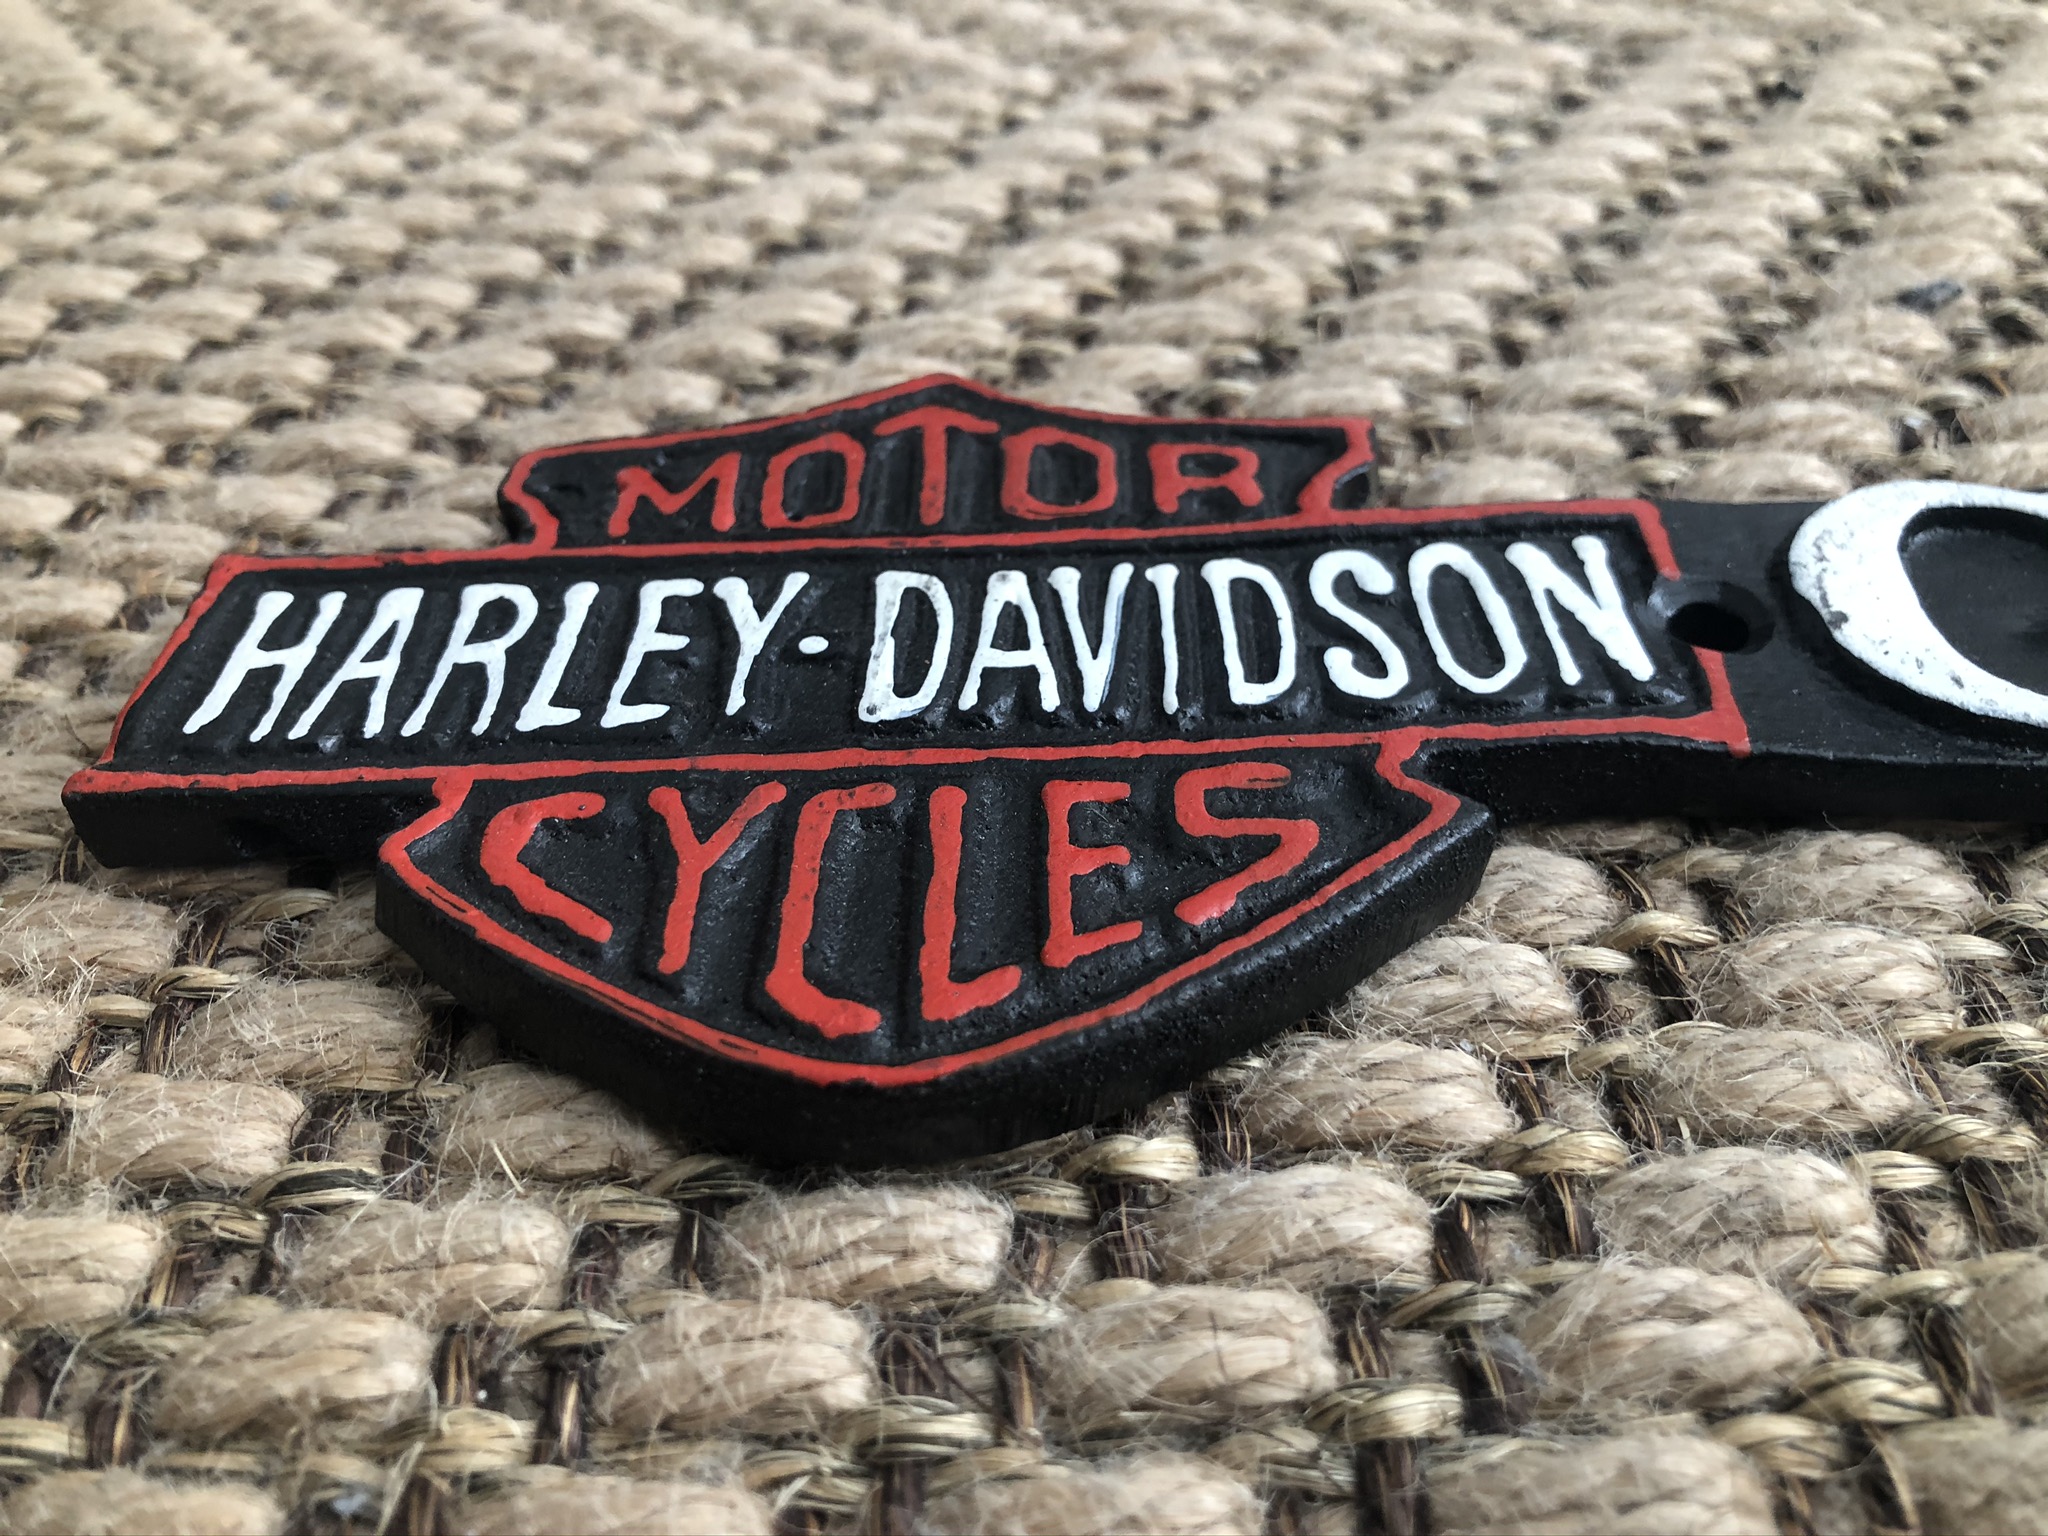 Cast Iron Harley Davidson Motorcycles Garage Arrow Wall Plaque - Image 3 of 5